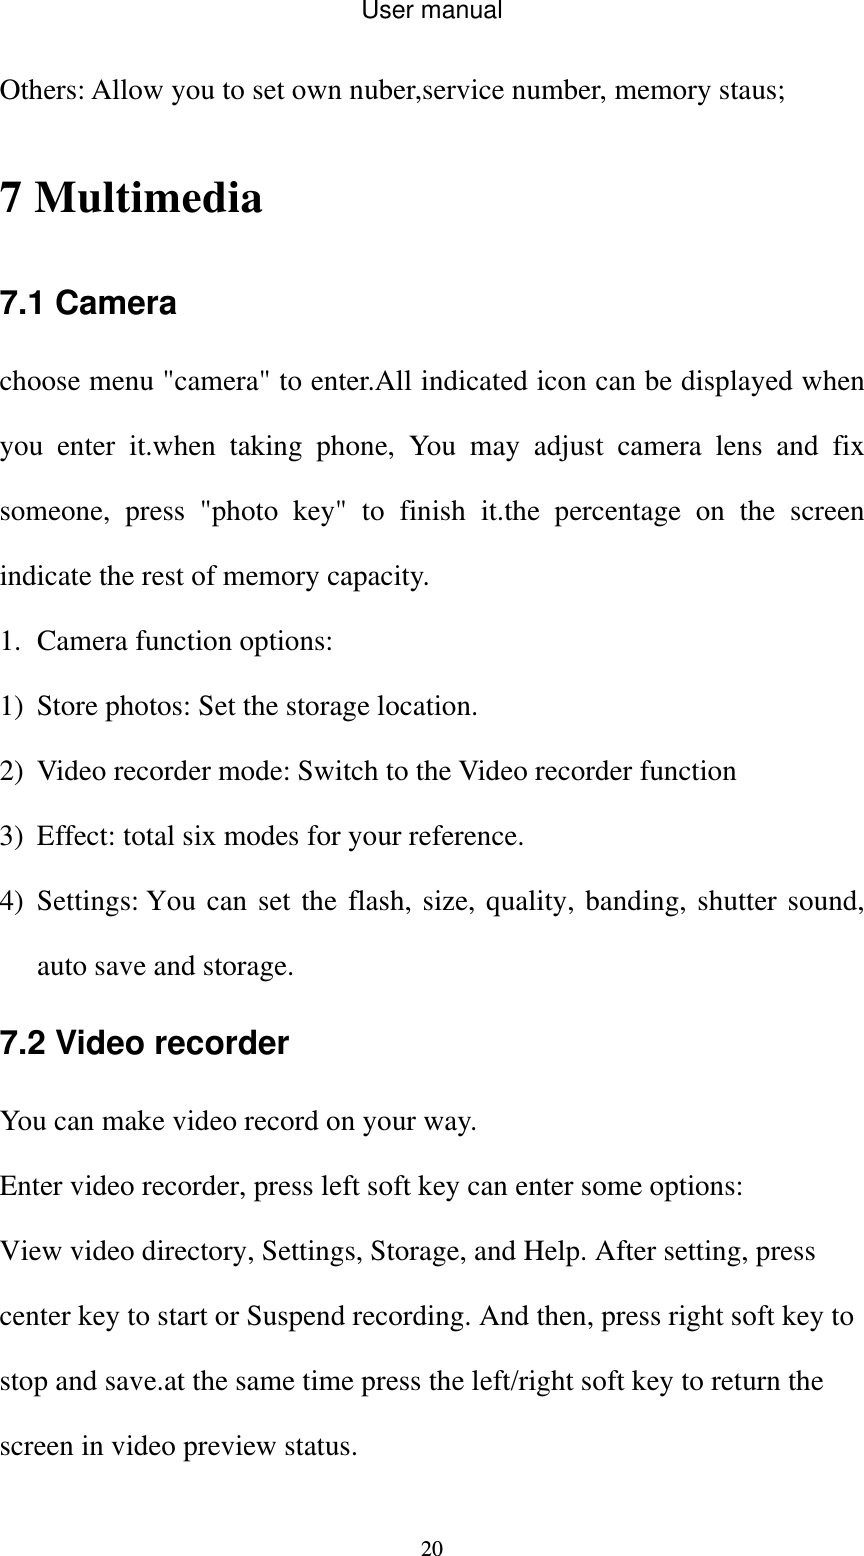 User manual  20Others: Allow you to set own nuber,service number, memory staus; 7 Multimedia 7.1 Camera choose menu &quot;camera&quot; to enter.All indicated icon can be displayed when you enter it.when taking phone, You may adjust camera lens and fix someone, press &quot;photo key&quot; to finish it.the percentage on the screen indicate the rest of memory capacity. 1. Camera function options: 1) Store photos: Set the storage location. 2) Video recorder mode: Switch to the Video recorder function 3) Effect: total six modes for your reference. 4) Settings: You can set the flash, size, quality, banding, shutter sound, auto save and storage. 7.2 Video recorder You can make video record on your way. Enter video recorder, press left soft key can enter some options: View video directory, Settings, Storage, and Help. After setting, press center key to start or Suspend recording. And then, press right soft key to stop and save.at the same time press the left/right soft key to return the screen in video preview status. 